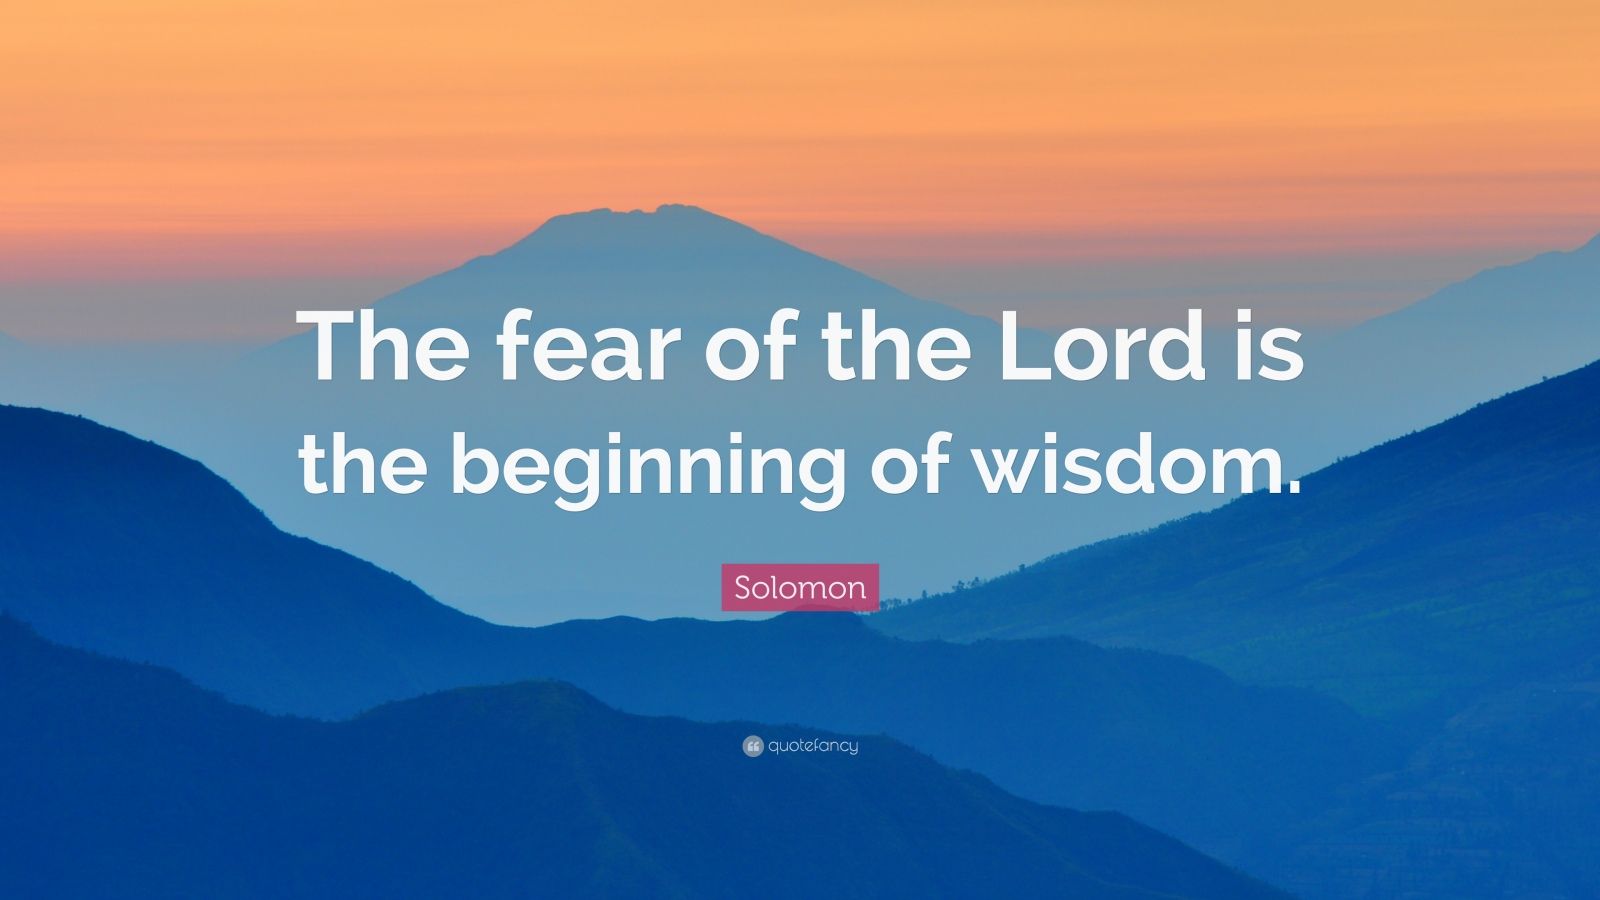 Solomon Quote: “The fear of the Lord is the beginning of wisdom.” (12